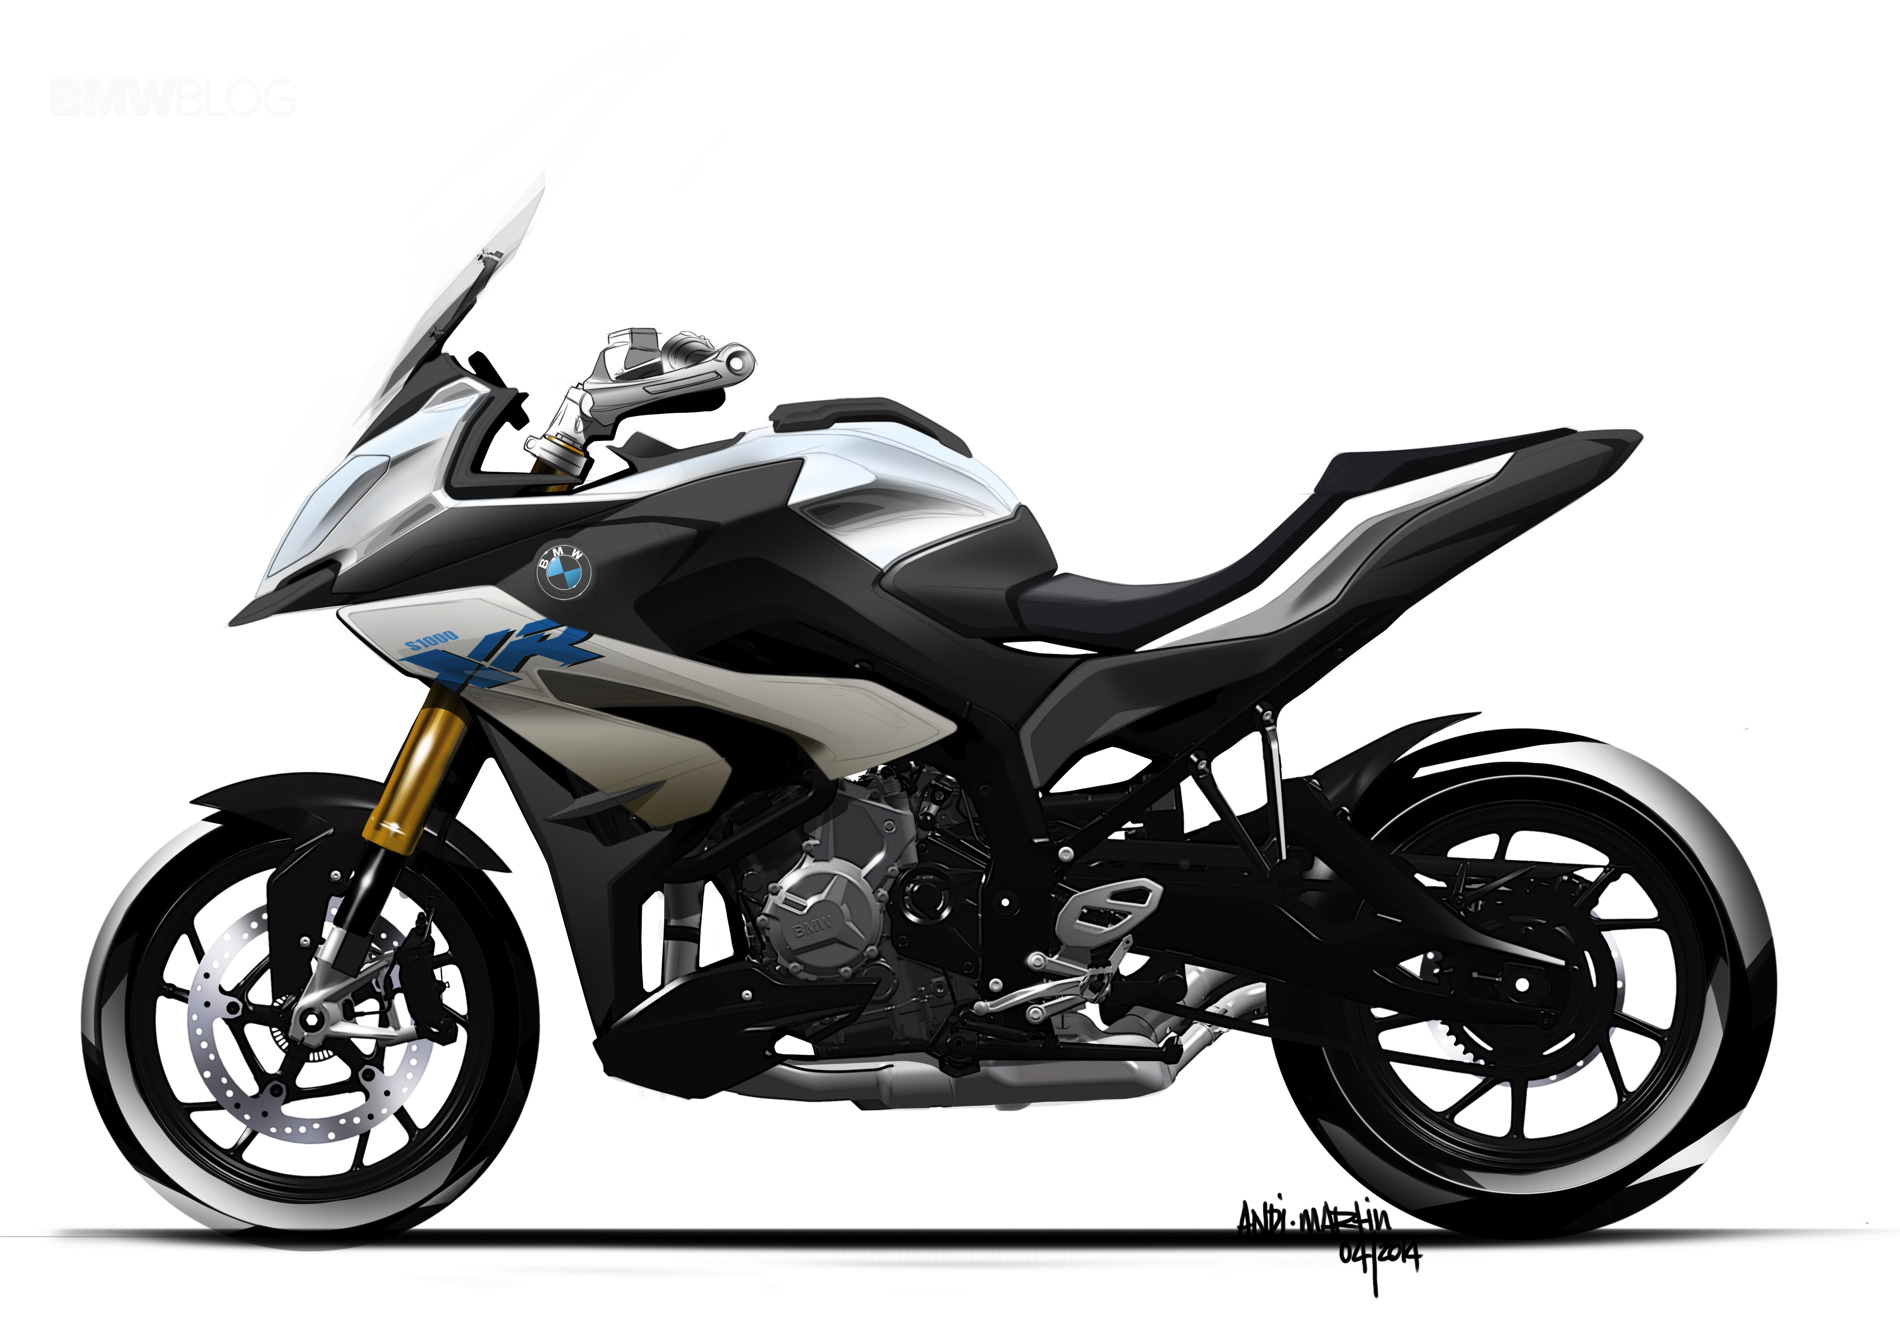 The BMW S 1000 XR - all good things come in fours